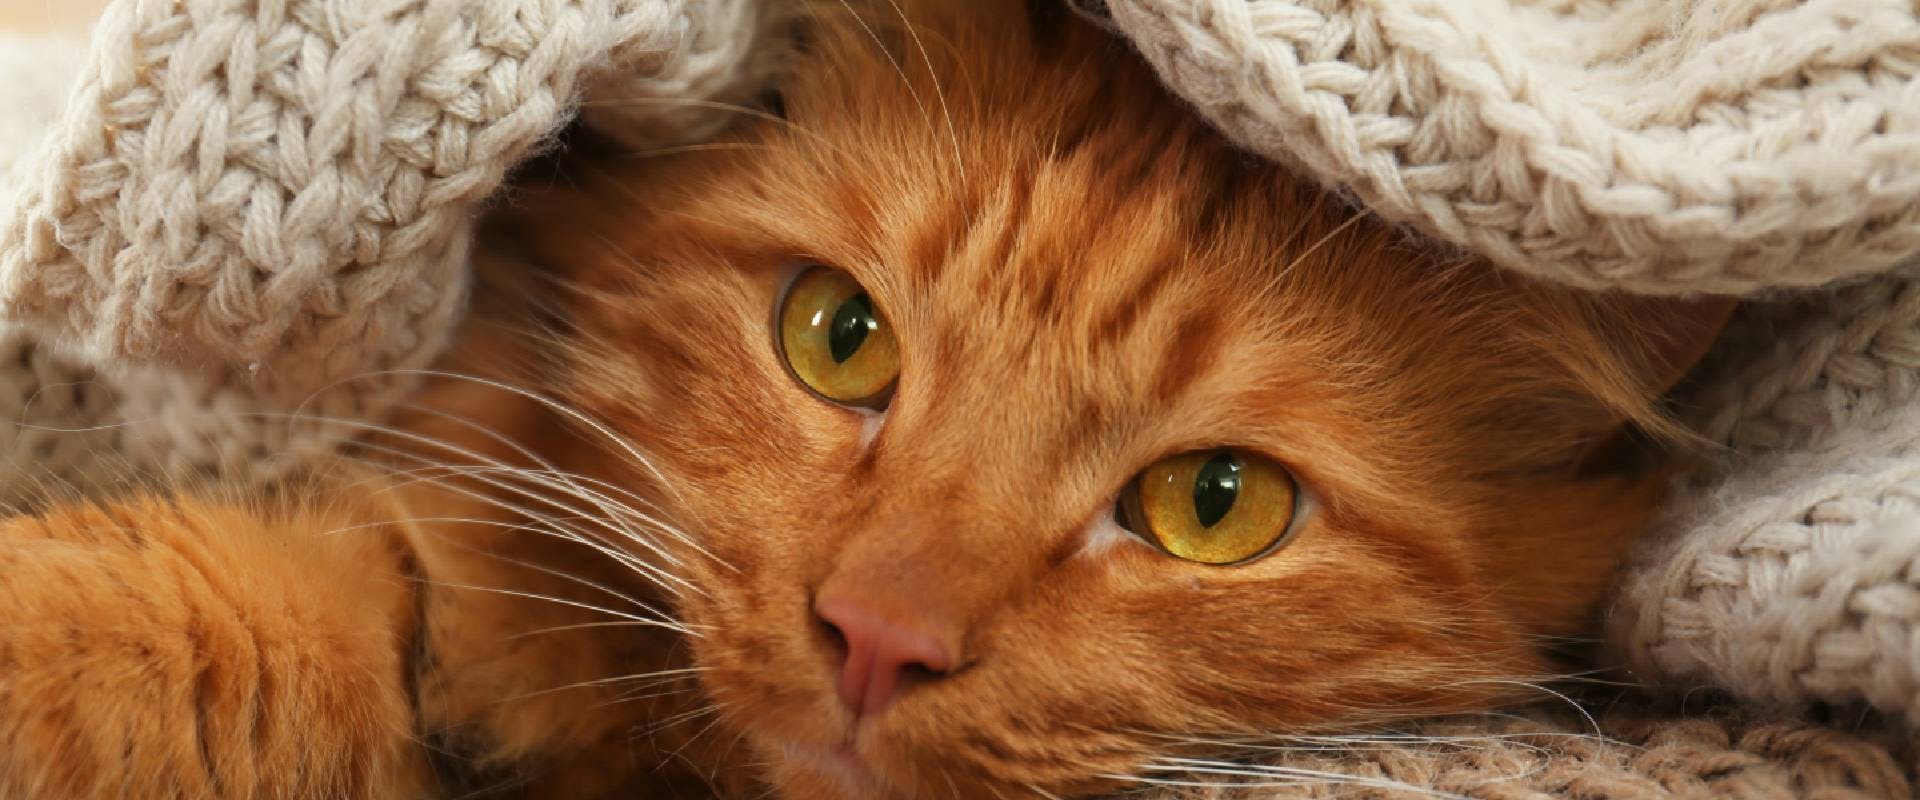 Close-up of a ginger cat